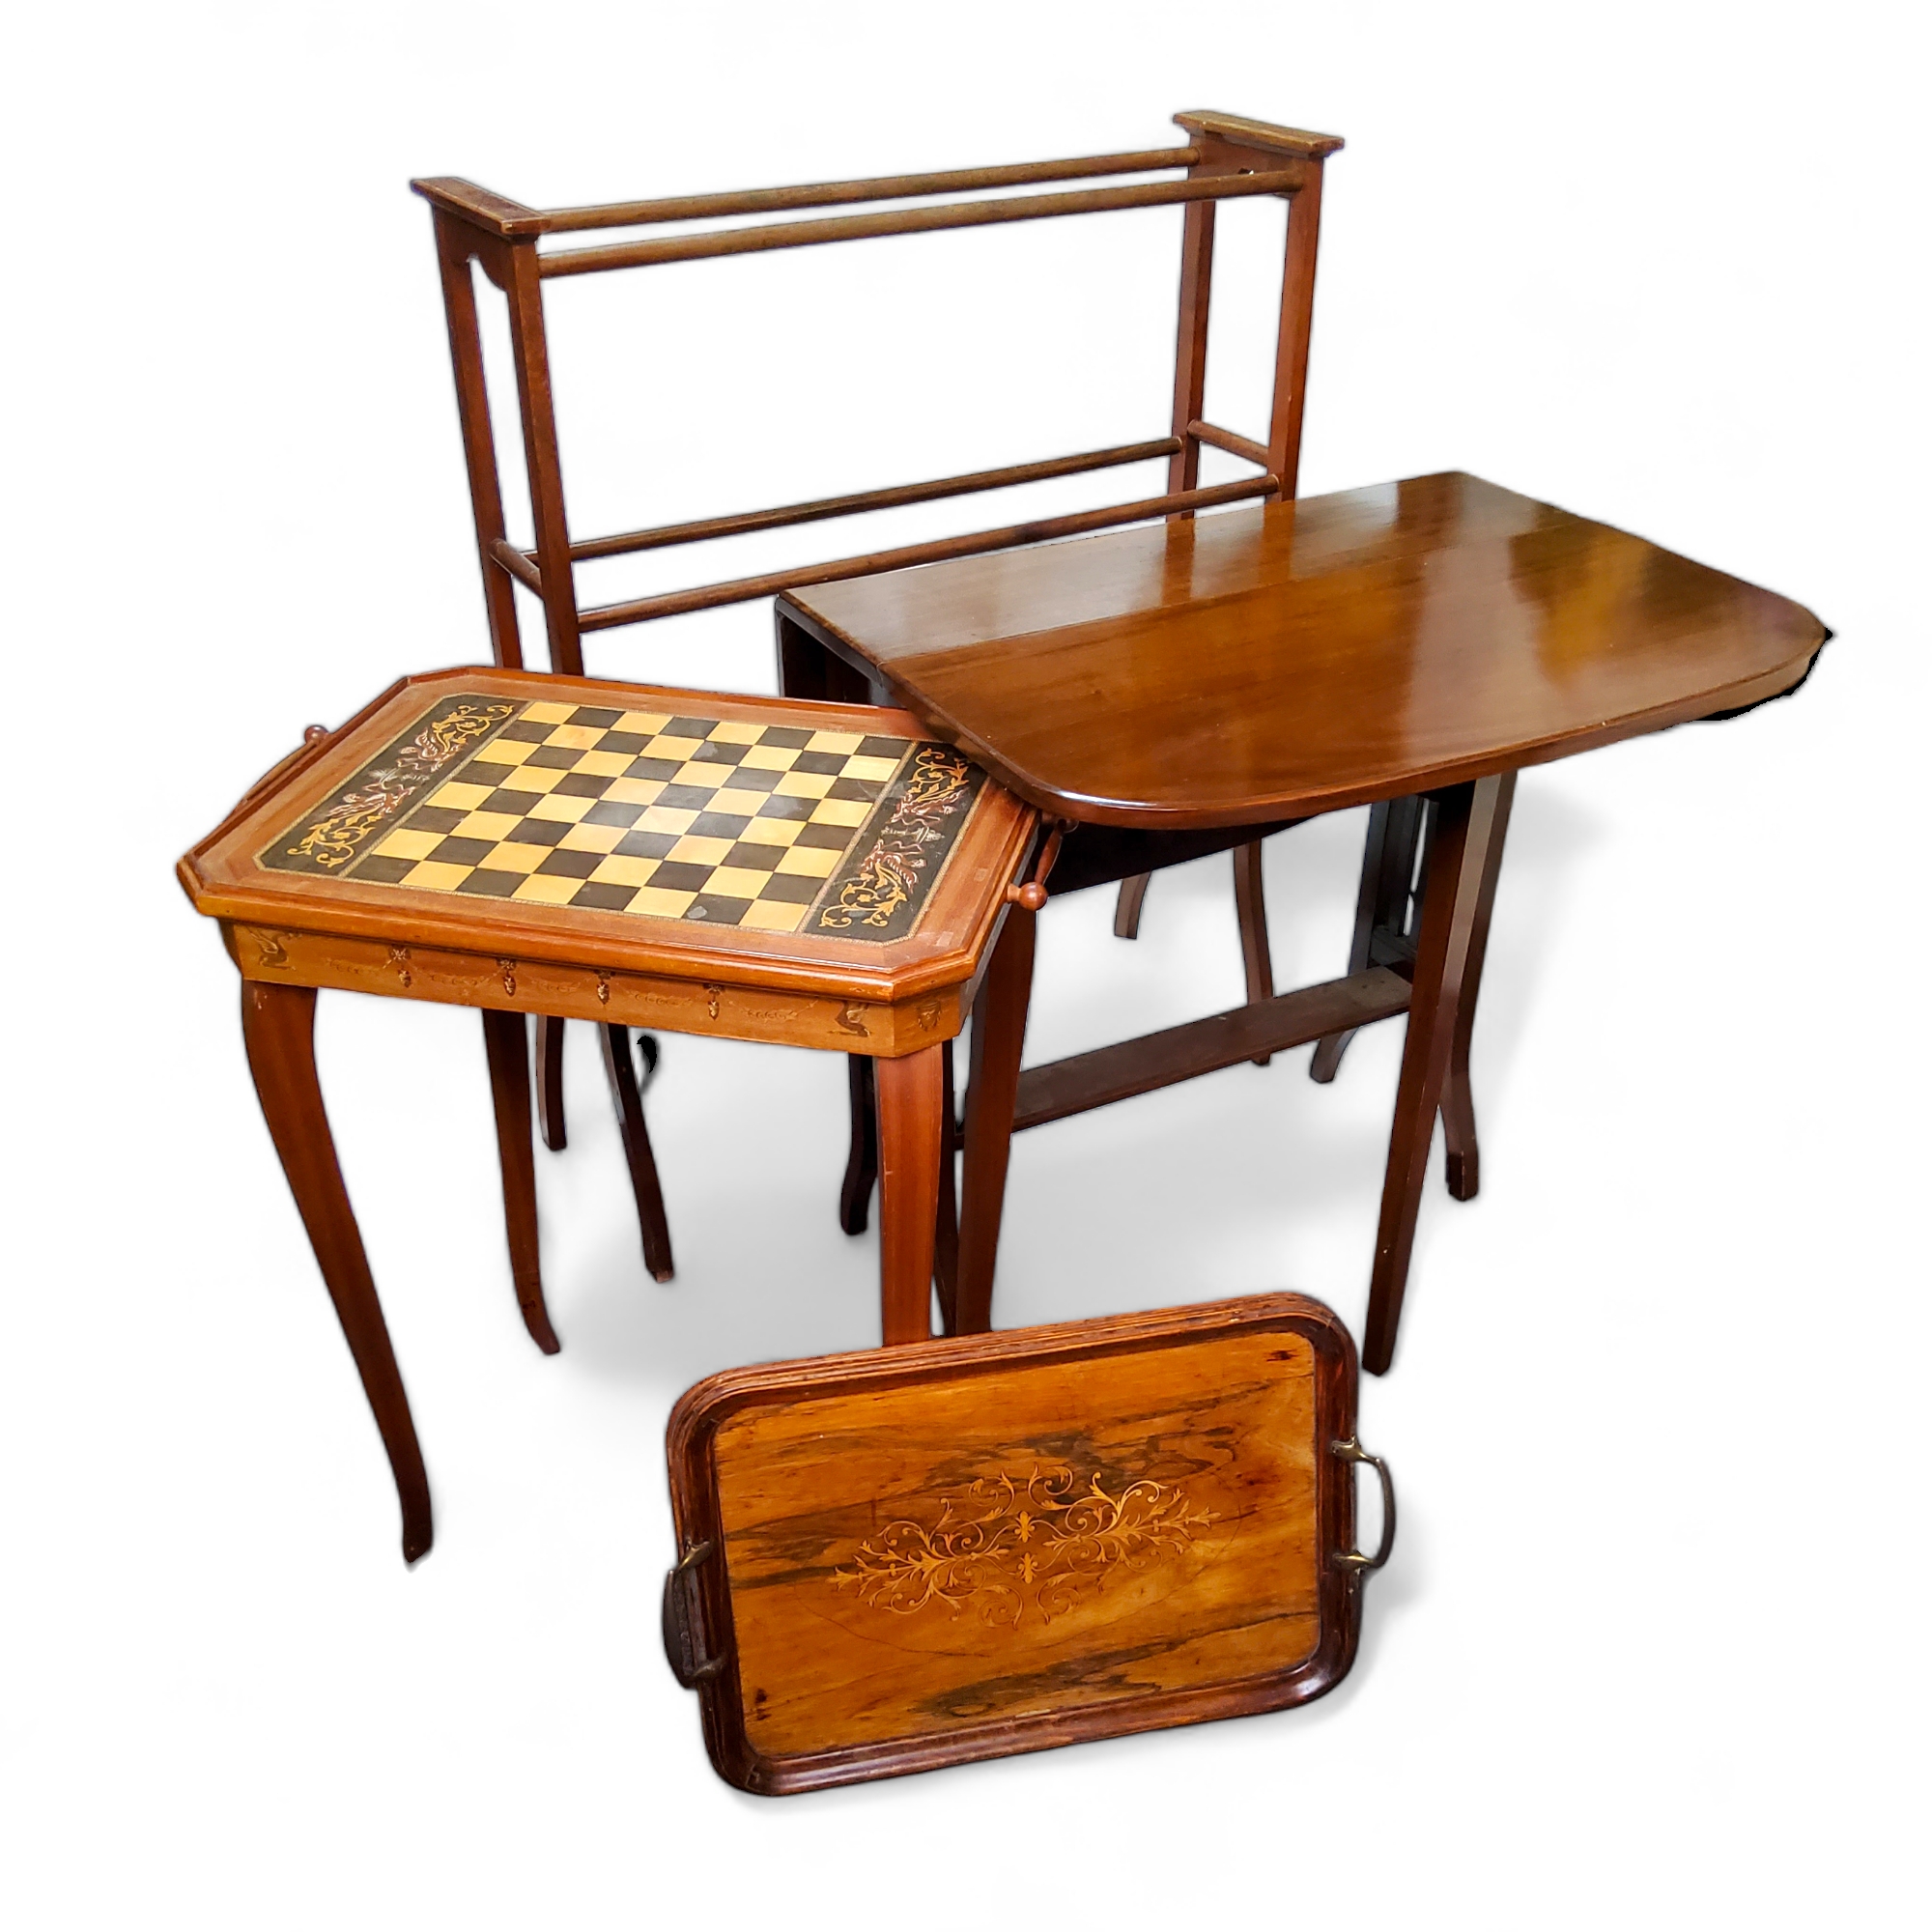 A Sheraton Revival chessboard/ games table, the tray top revealing a niche for chess pieces; towel